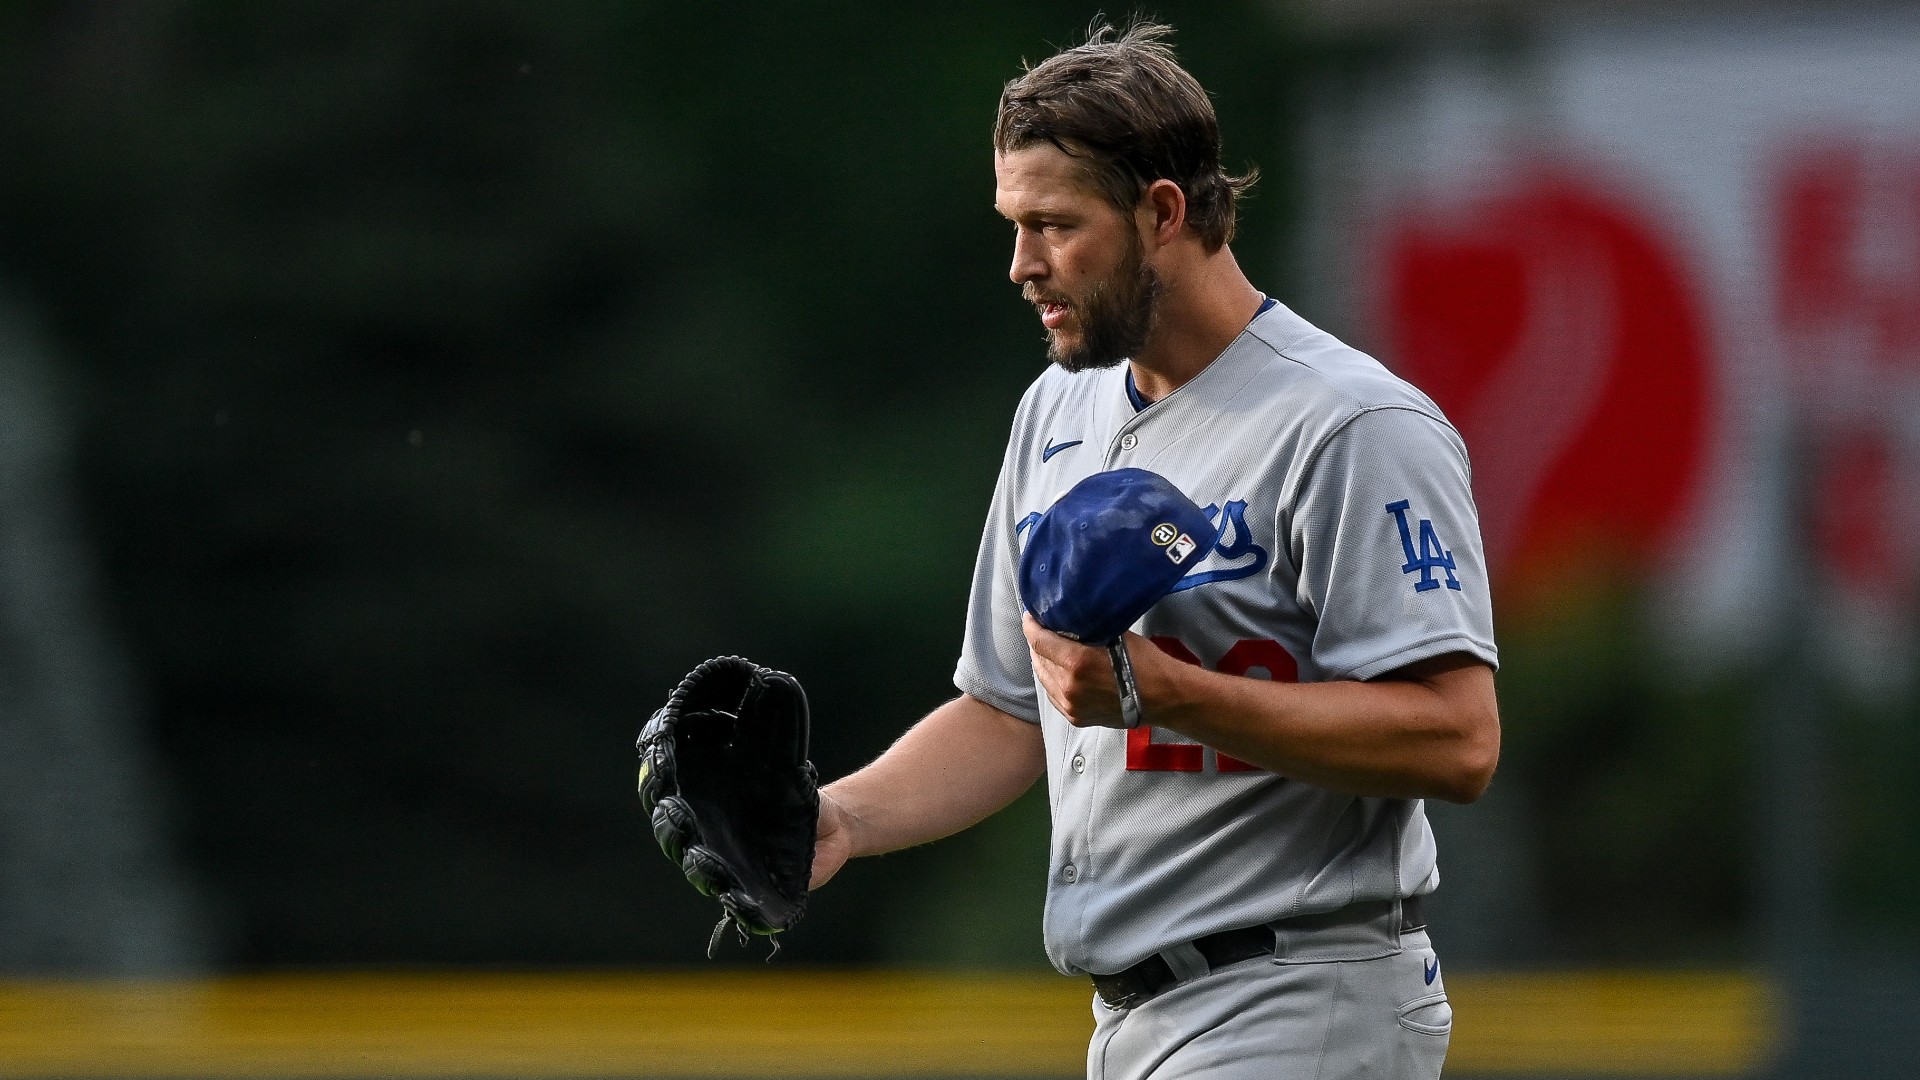 Padres vs. Dodgers MLB Odds, Picks, Predictions: Will L.A. Roll Behind Clayton Kershaw? (Sunday, July 3) article feature image